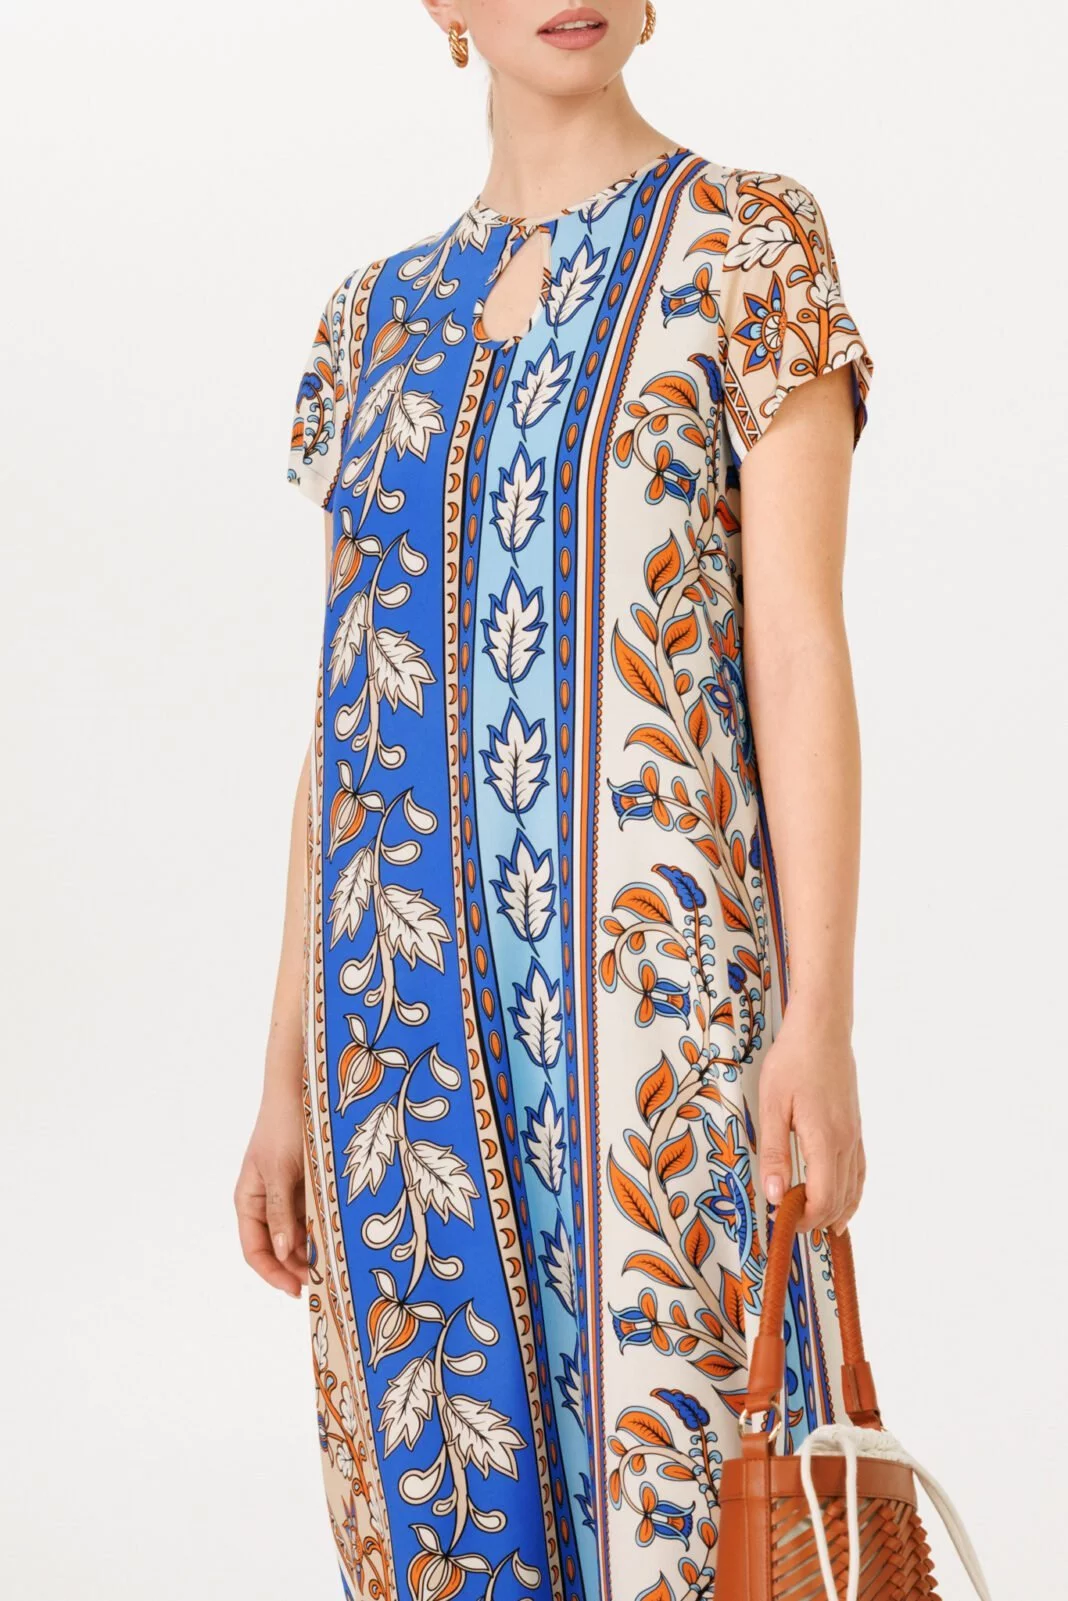 High-Quality Luxurious Maxi Length Kaftan Dress - Beige and Blue Elegance for Premium Vacation and Evening Affairs